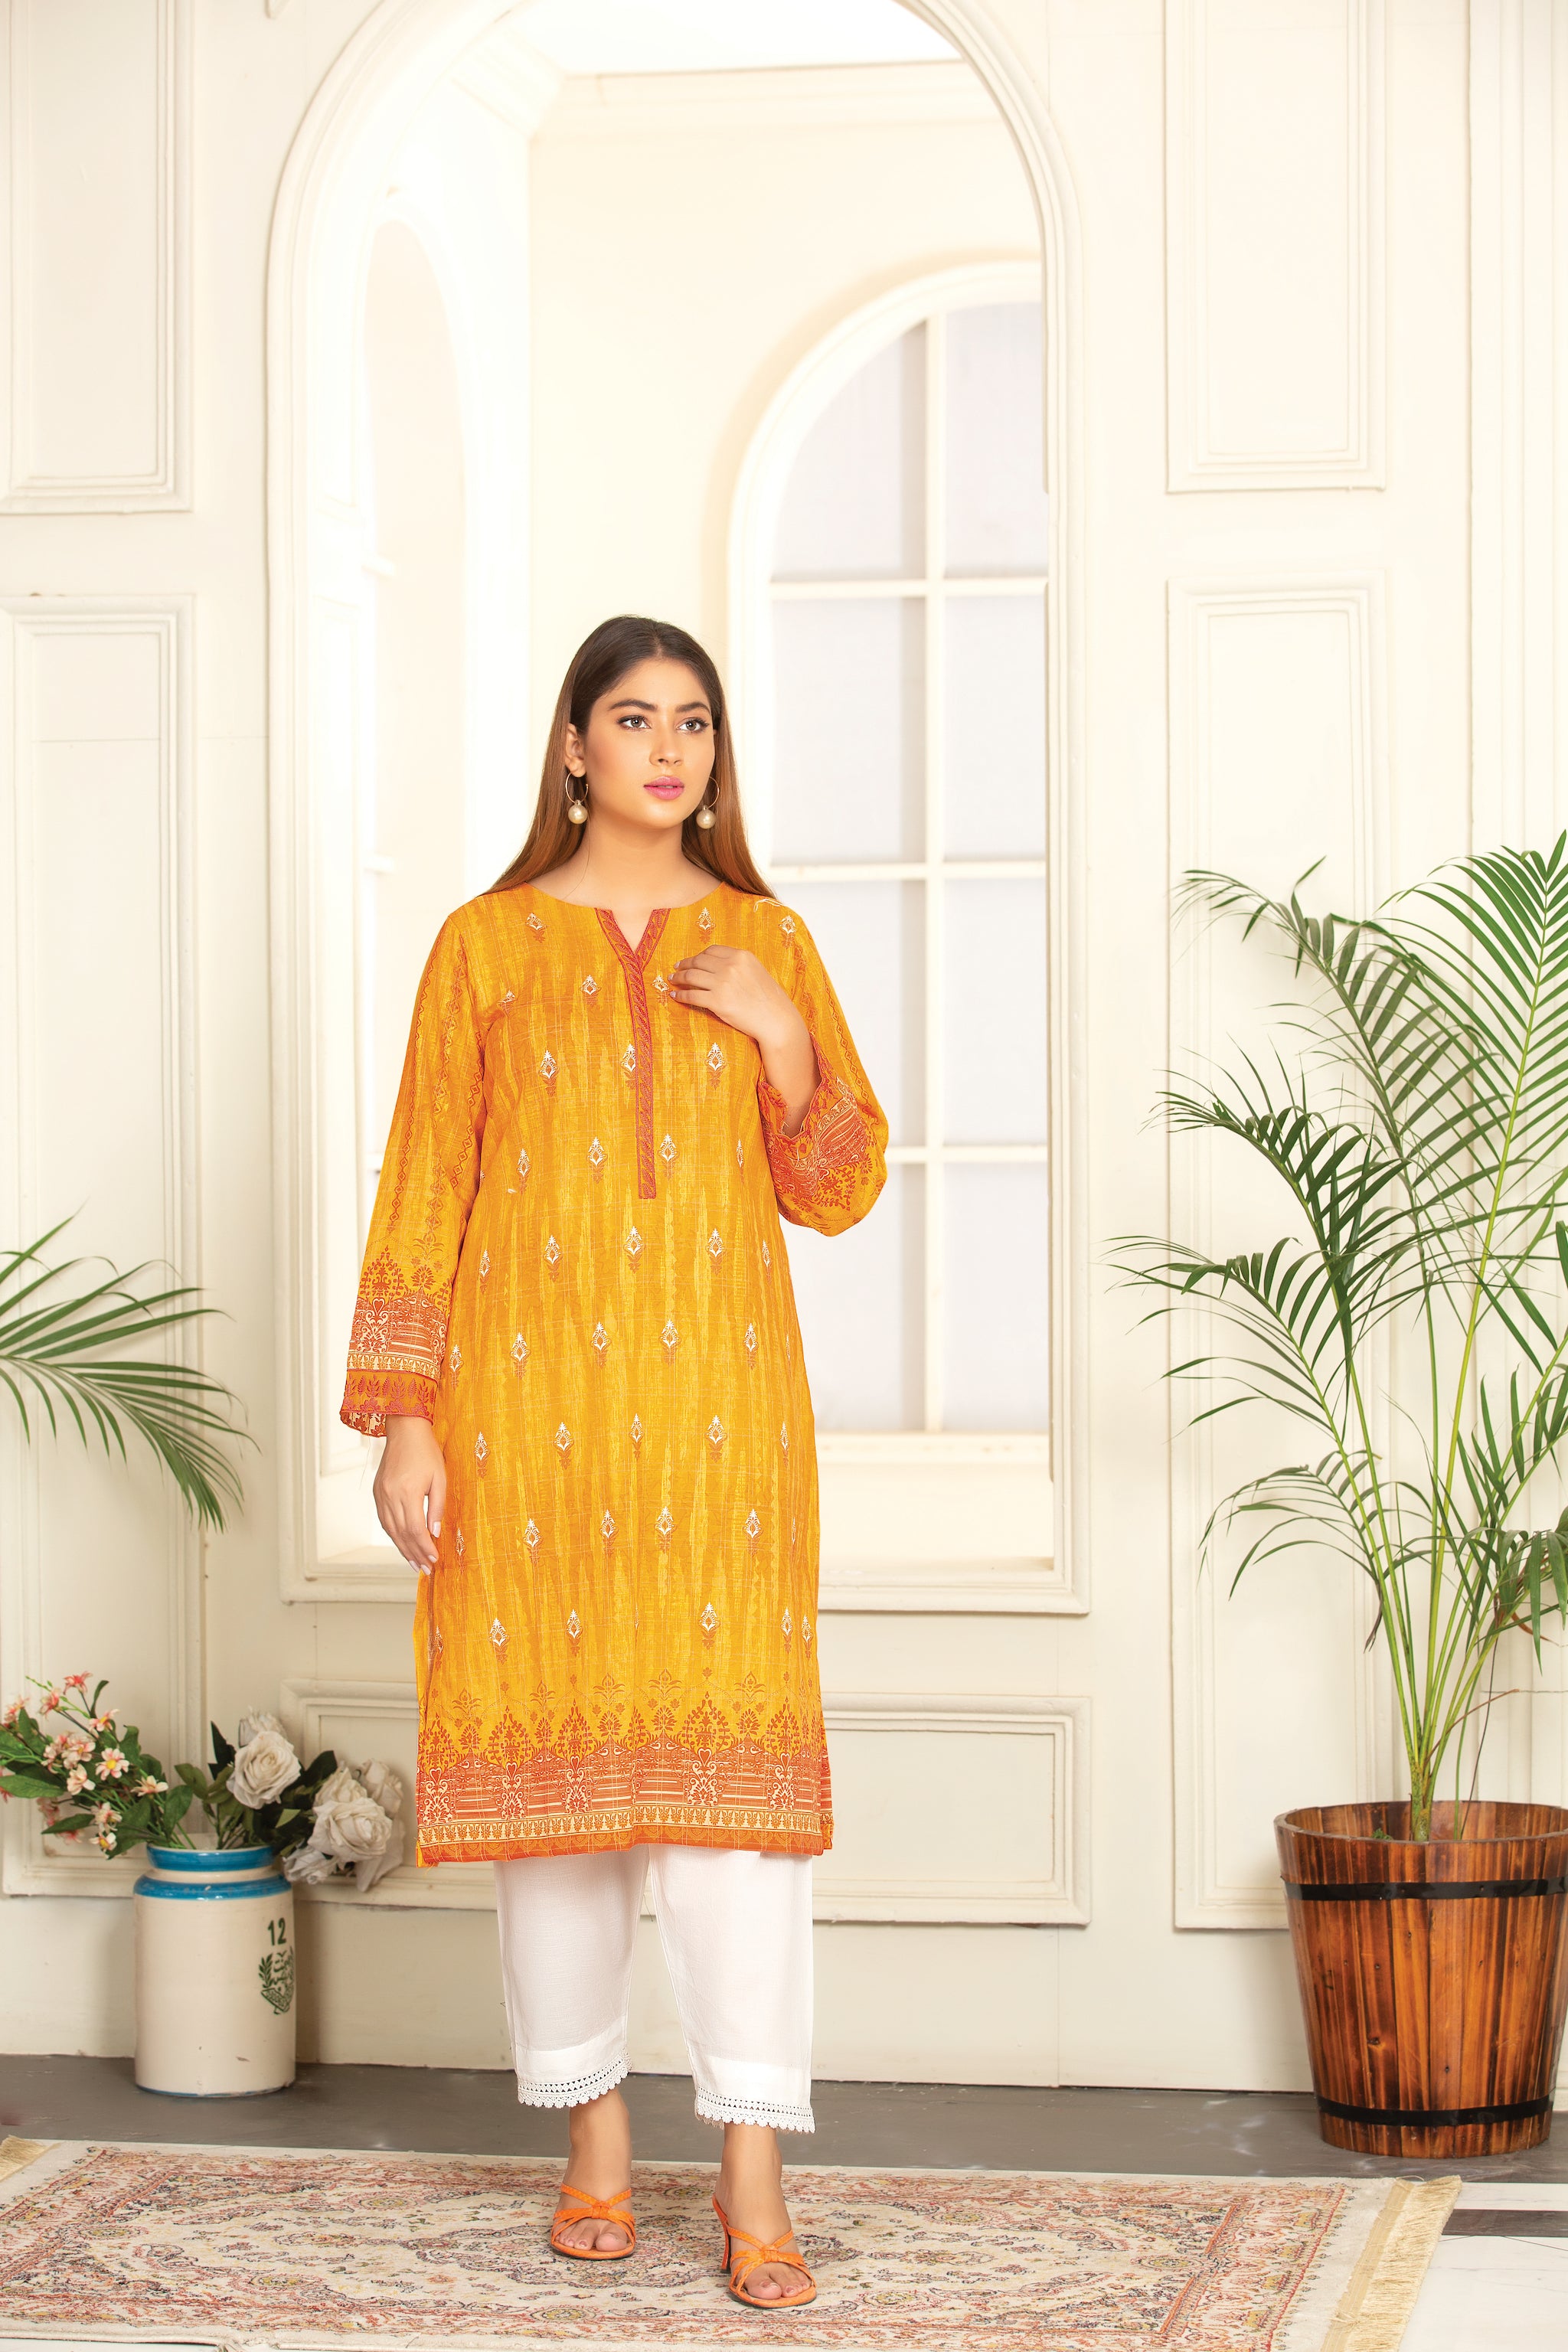 ZAVIYA COLLECTION / 1PC / DIGITAL PRINTED EMBROIDERED KHADDAR SHIRT 1.75MTR PRICE 1225/- PKR WINTER 2022 COLLECTION BY SAFA NOOR